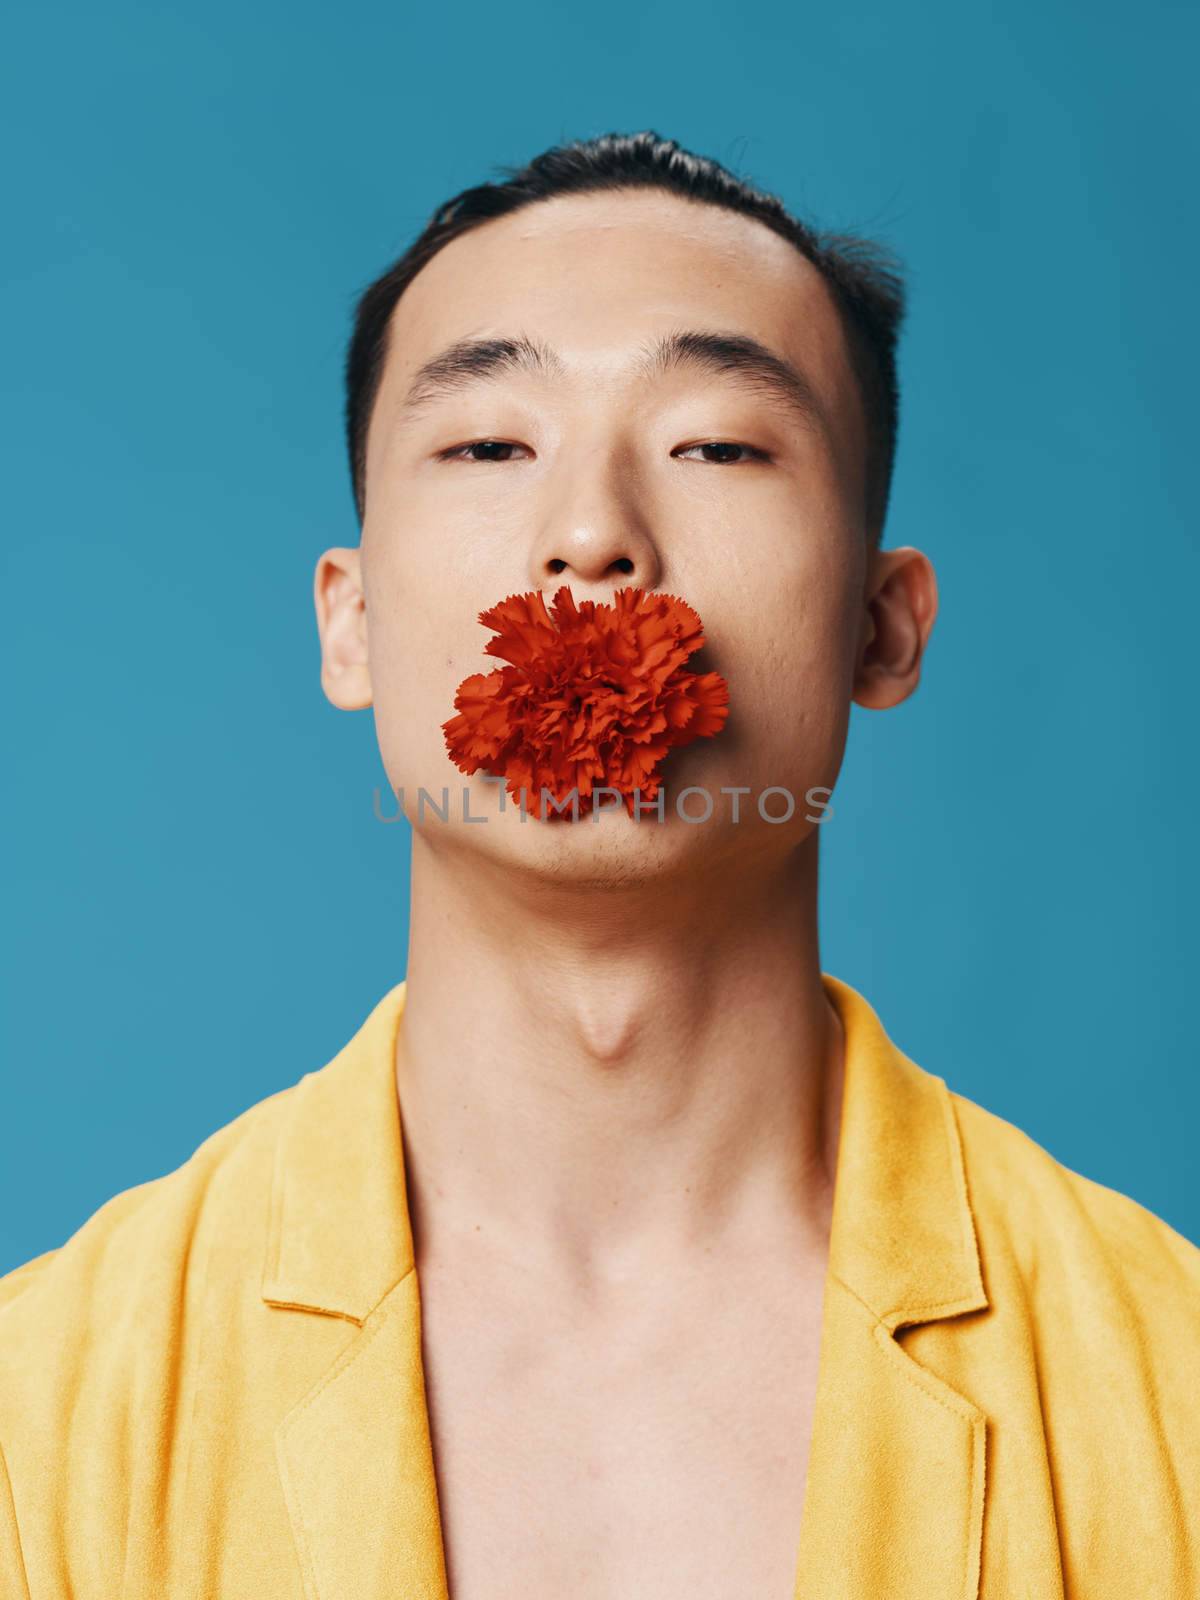 Asian man with red flower in teeth yellow coat bared torso close-up . High quality photo